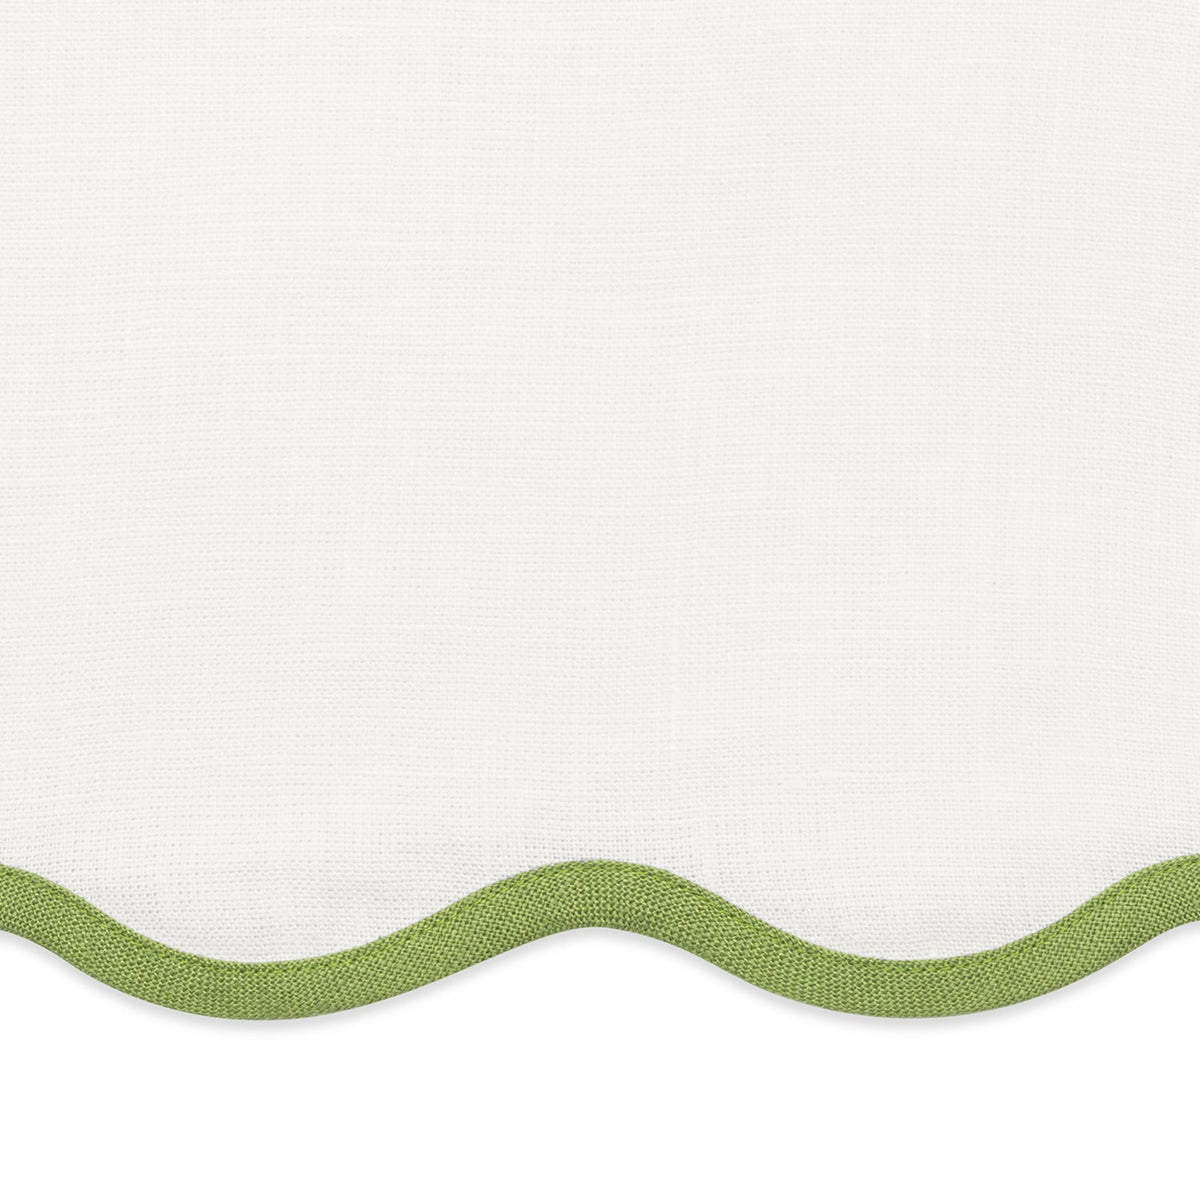 Swatch Sample of Matouk Scallop Edge Table Linens in Grass Color